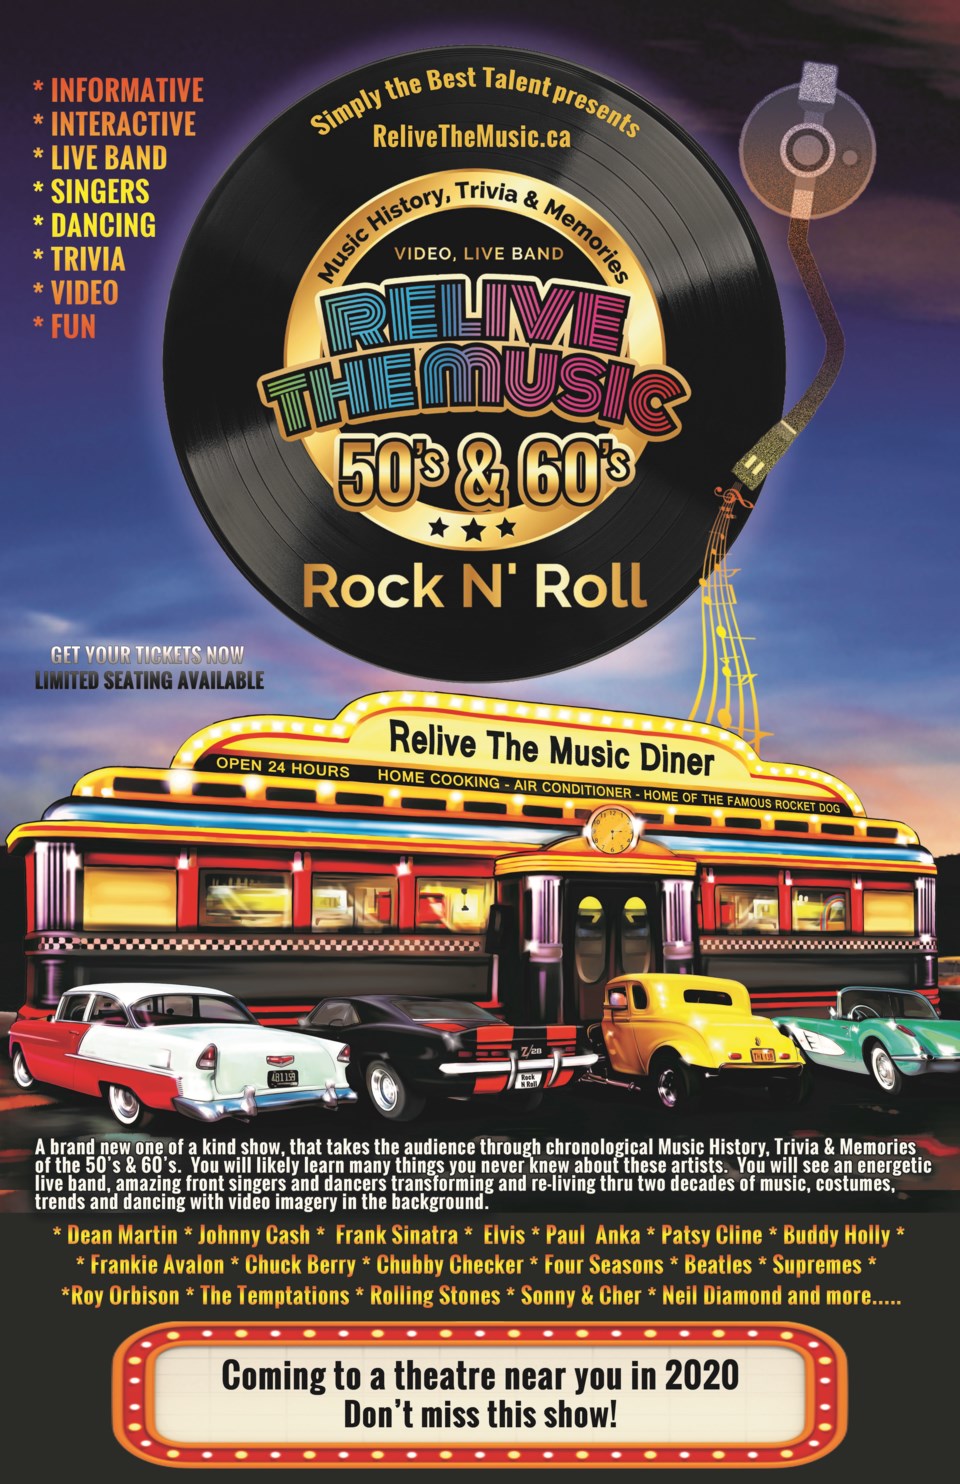 Relive the Music 50s and 60s Rock n Roll show